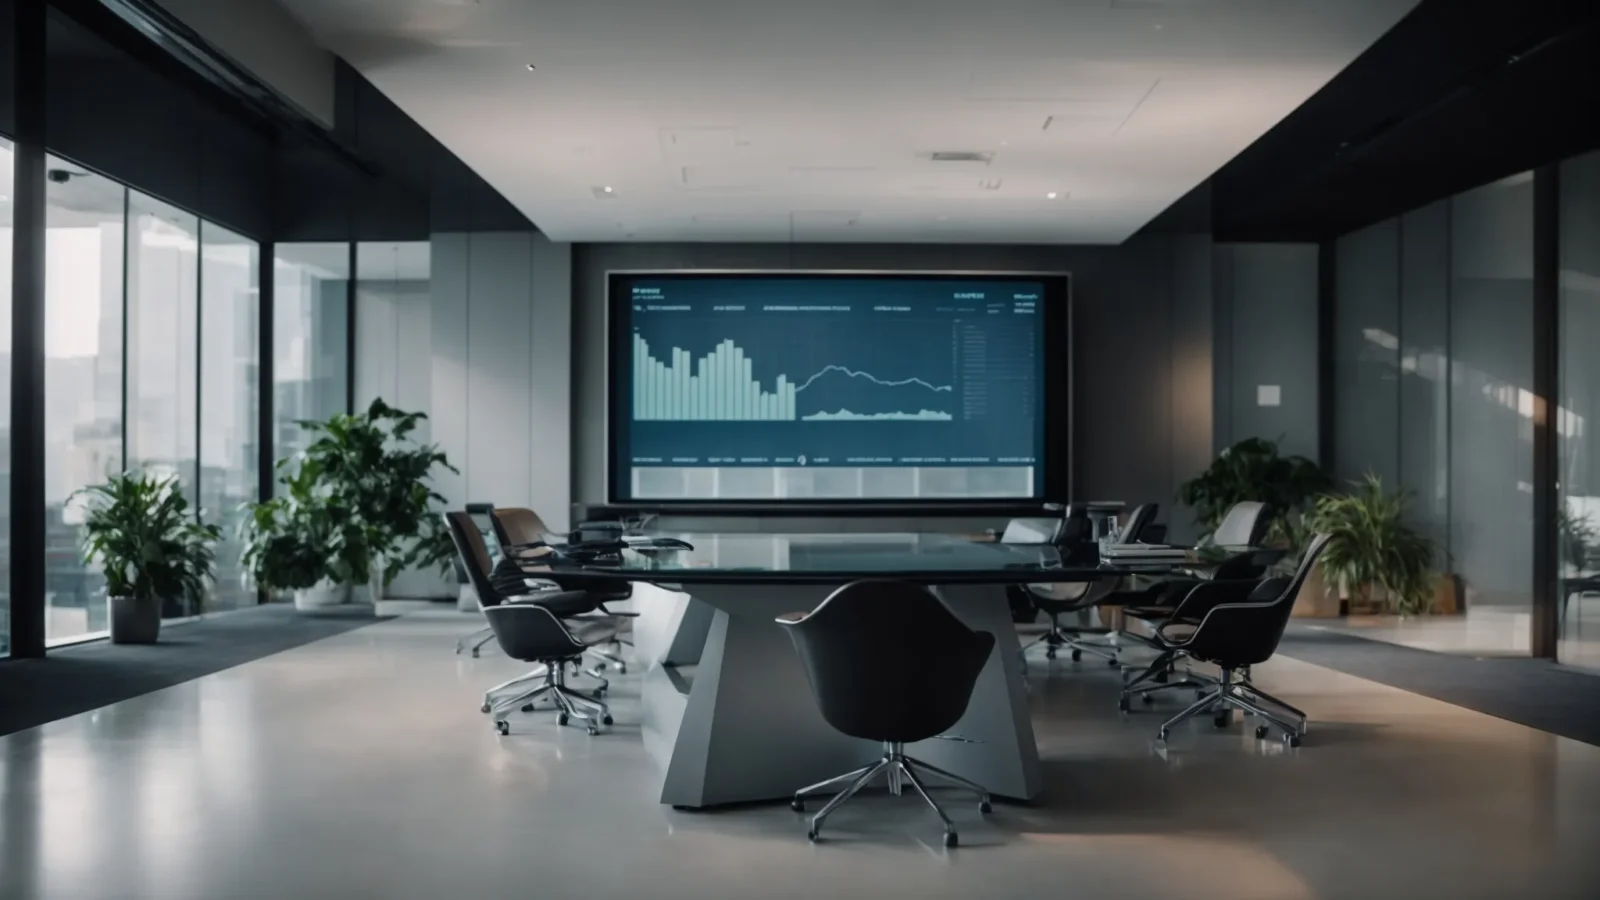 a sleek, modern conference room where a team of professionals are gathered around a glass table, deep in discussion over financial charts projected on the screen.